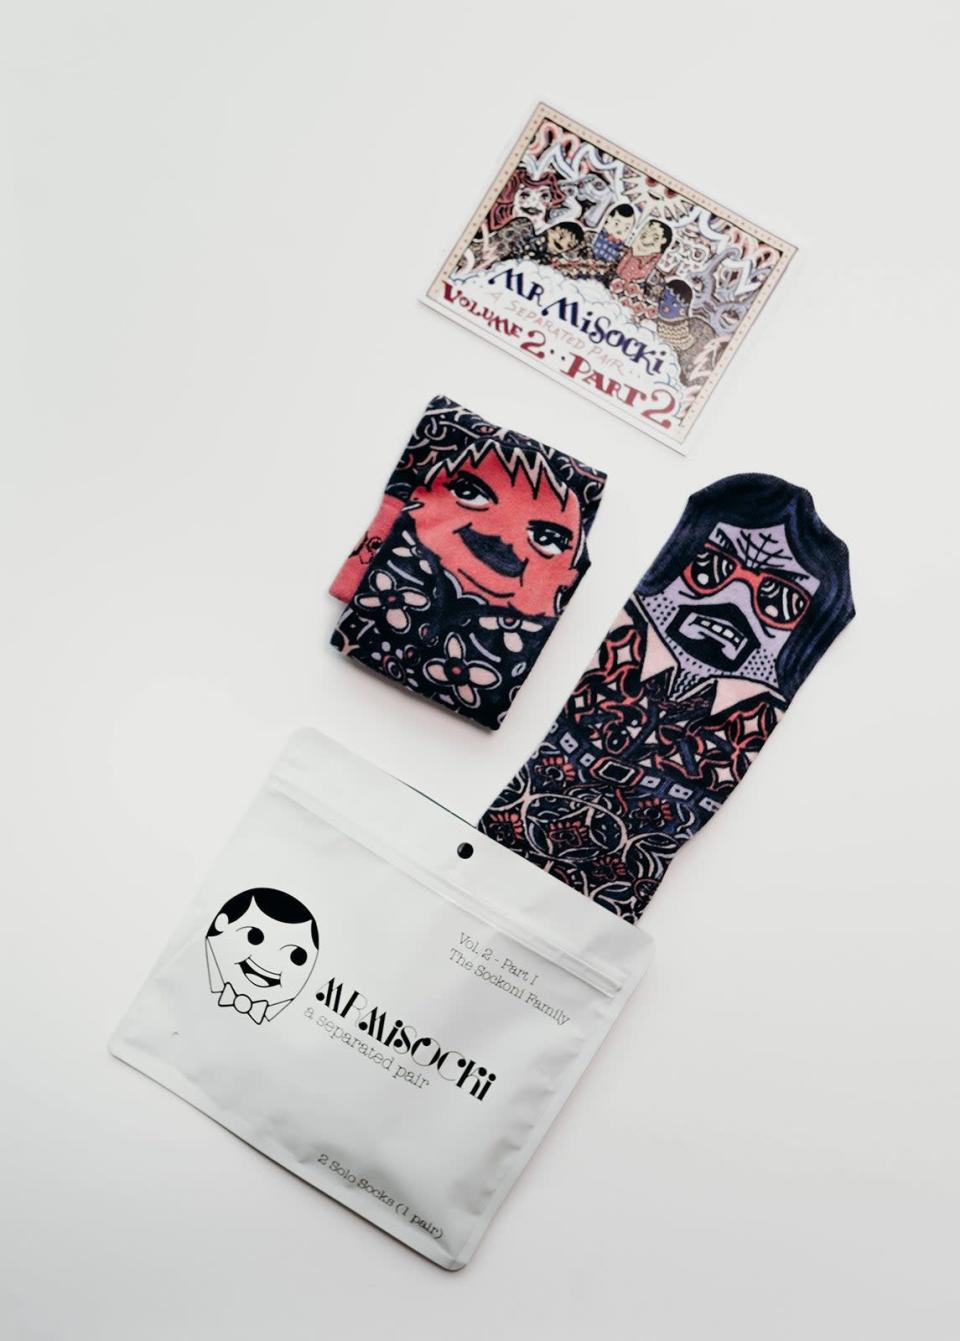 <h2>MrMiSocki 3-Pack Comic Socks</h2><br>But seriously, what's a gift guide without a pair of socks or <em>two</em>? Bear with us, this pair is special. This charming oddball gift from creative sock-enthusiast Munish Taneja is a pair of mismatched socks that come with a comic book about a sock who wakes in the dryer only to realize that he's lost his other half. The "volumes" are limited, so snatch up what's left for the person who likes a gift with a story, comic illustrations, or simply a funky pair of socks to brighten his day. Currently, when you buy three or more pairs of these fun-lovin' foot huggers, you can snag 60% off your entire order.<br><br><strong>Deal: </strong><a href="https://www.mrmisocki.com/collections/volumes" rel="nofollow noopener" target="_blank" data-ylk="slk:60% off + free shipping on three pairs at MrMiSocki" class="link rapid-noclick-resp">60% off + free shipping on three pairs at MrMiSocki</a><br><strong>Promo Code: </strong>None<br><br><strong>MrMiSocki</strong> Volume 2.2- Soxi Brown & ASAP Socky (3-Count), $, available at <a href="https://go.skimresources.com/?id=30283X879131&url=https%3A%2F%2Fwww.mrmisocki.com%2Fcollections%2Fvolumes%2Fproducts%2Fvolume-2-2" rel="nofollow noopener" target="_blank" data-ylk="slk:MrMiSocki" class="link rapid-noclick-resp">MrMiSocki</a>